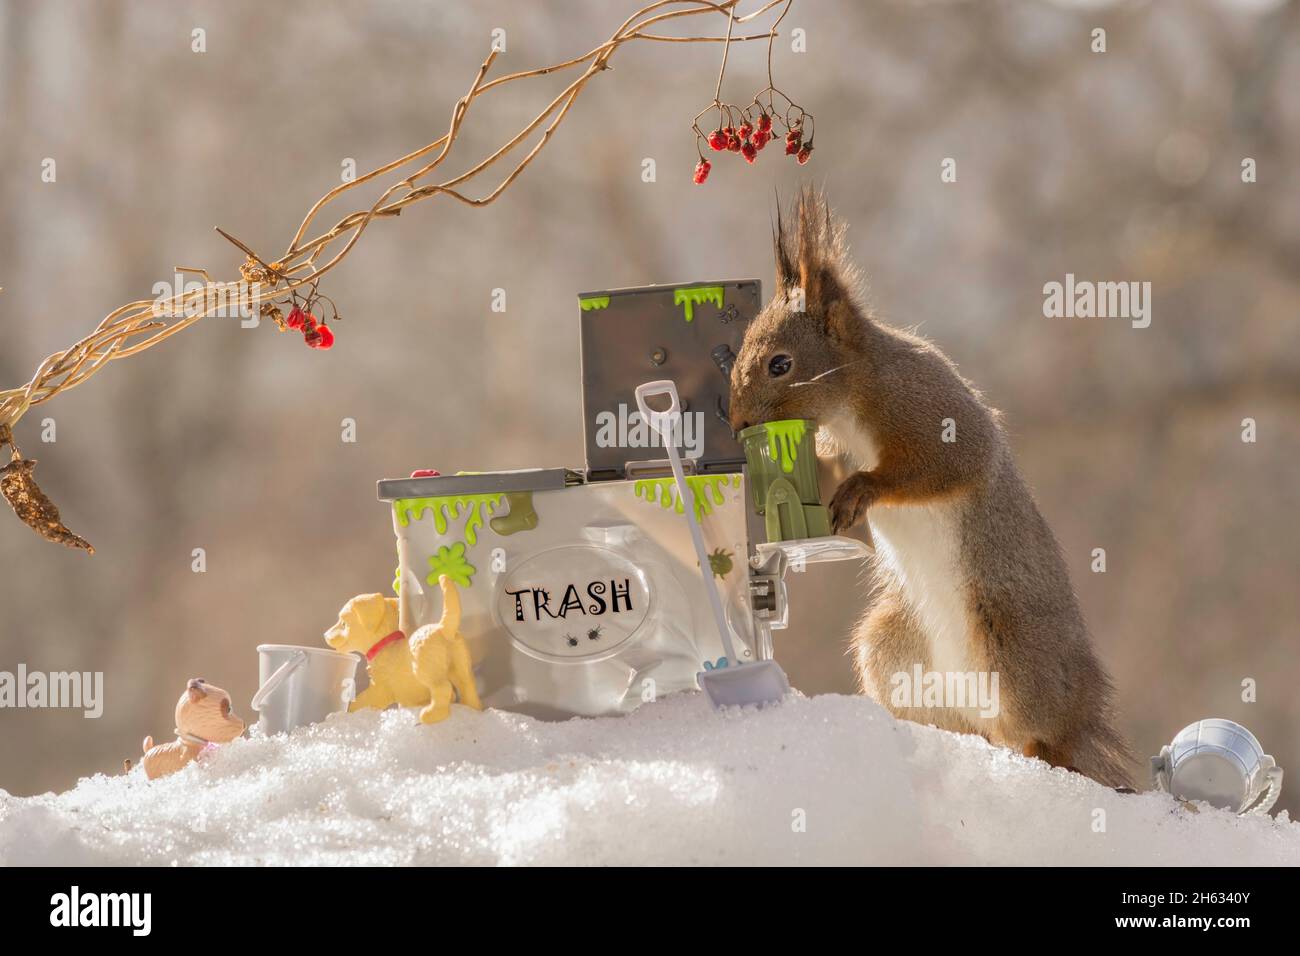 profile and close up of red squirrel standing eating out of a trash can Stock Photo